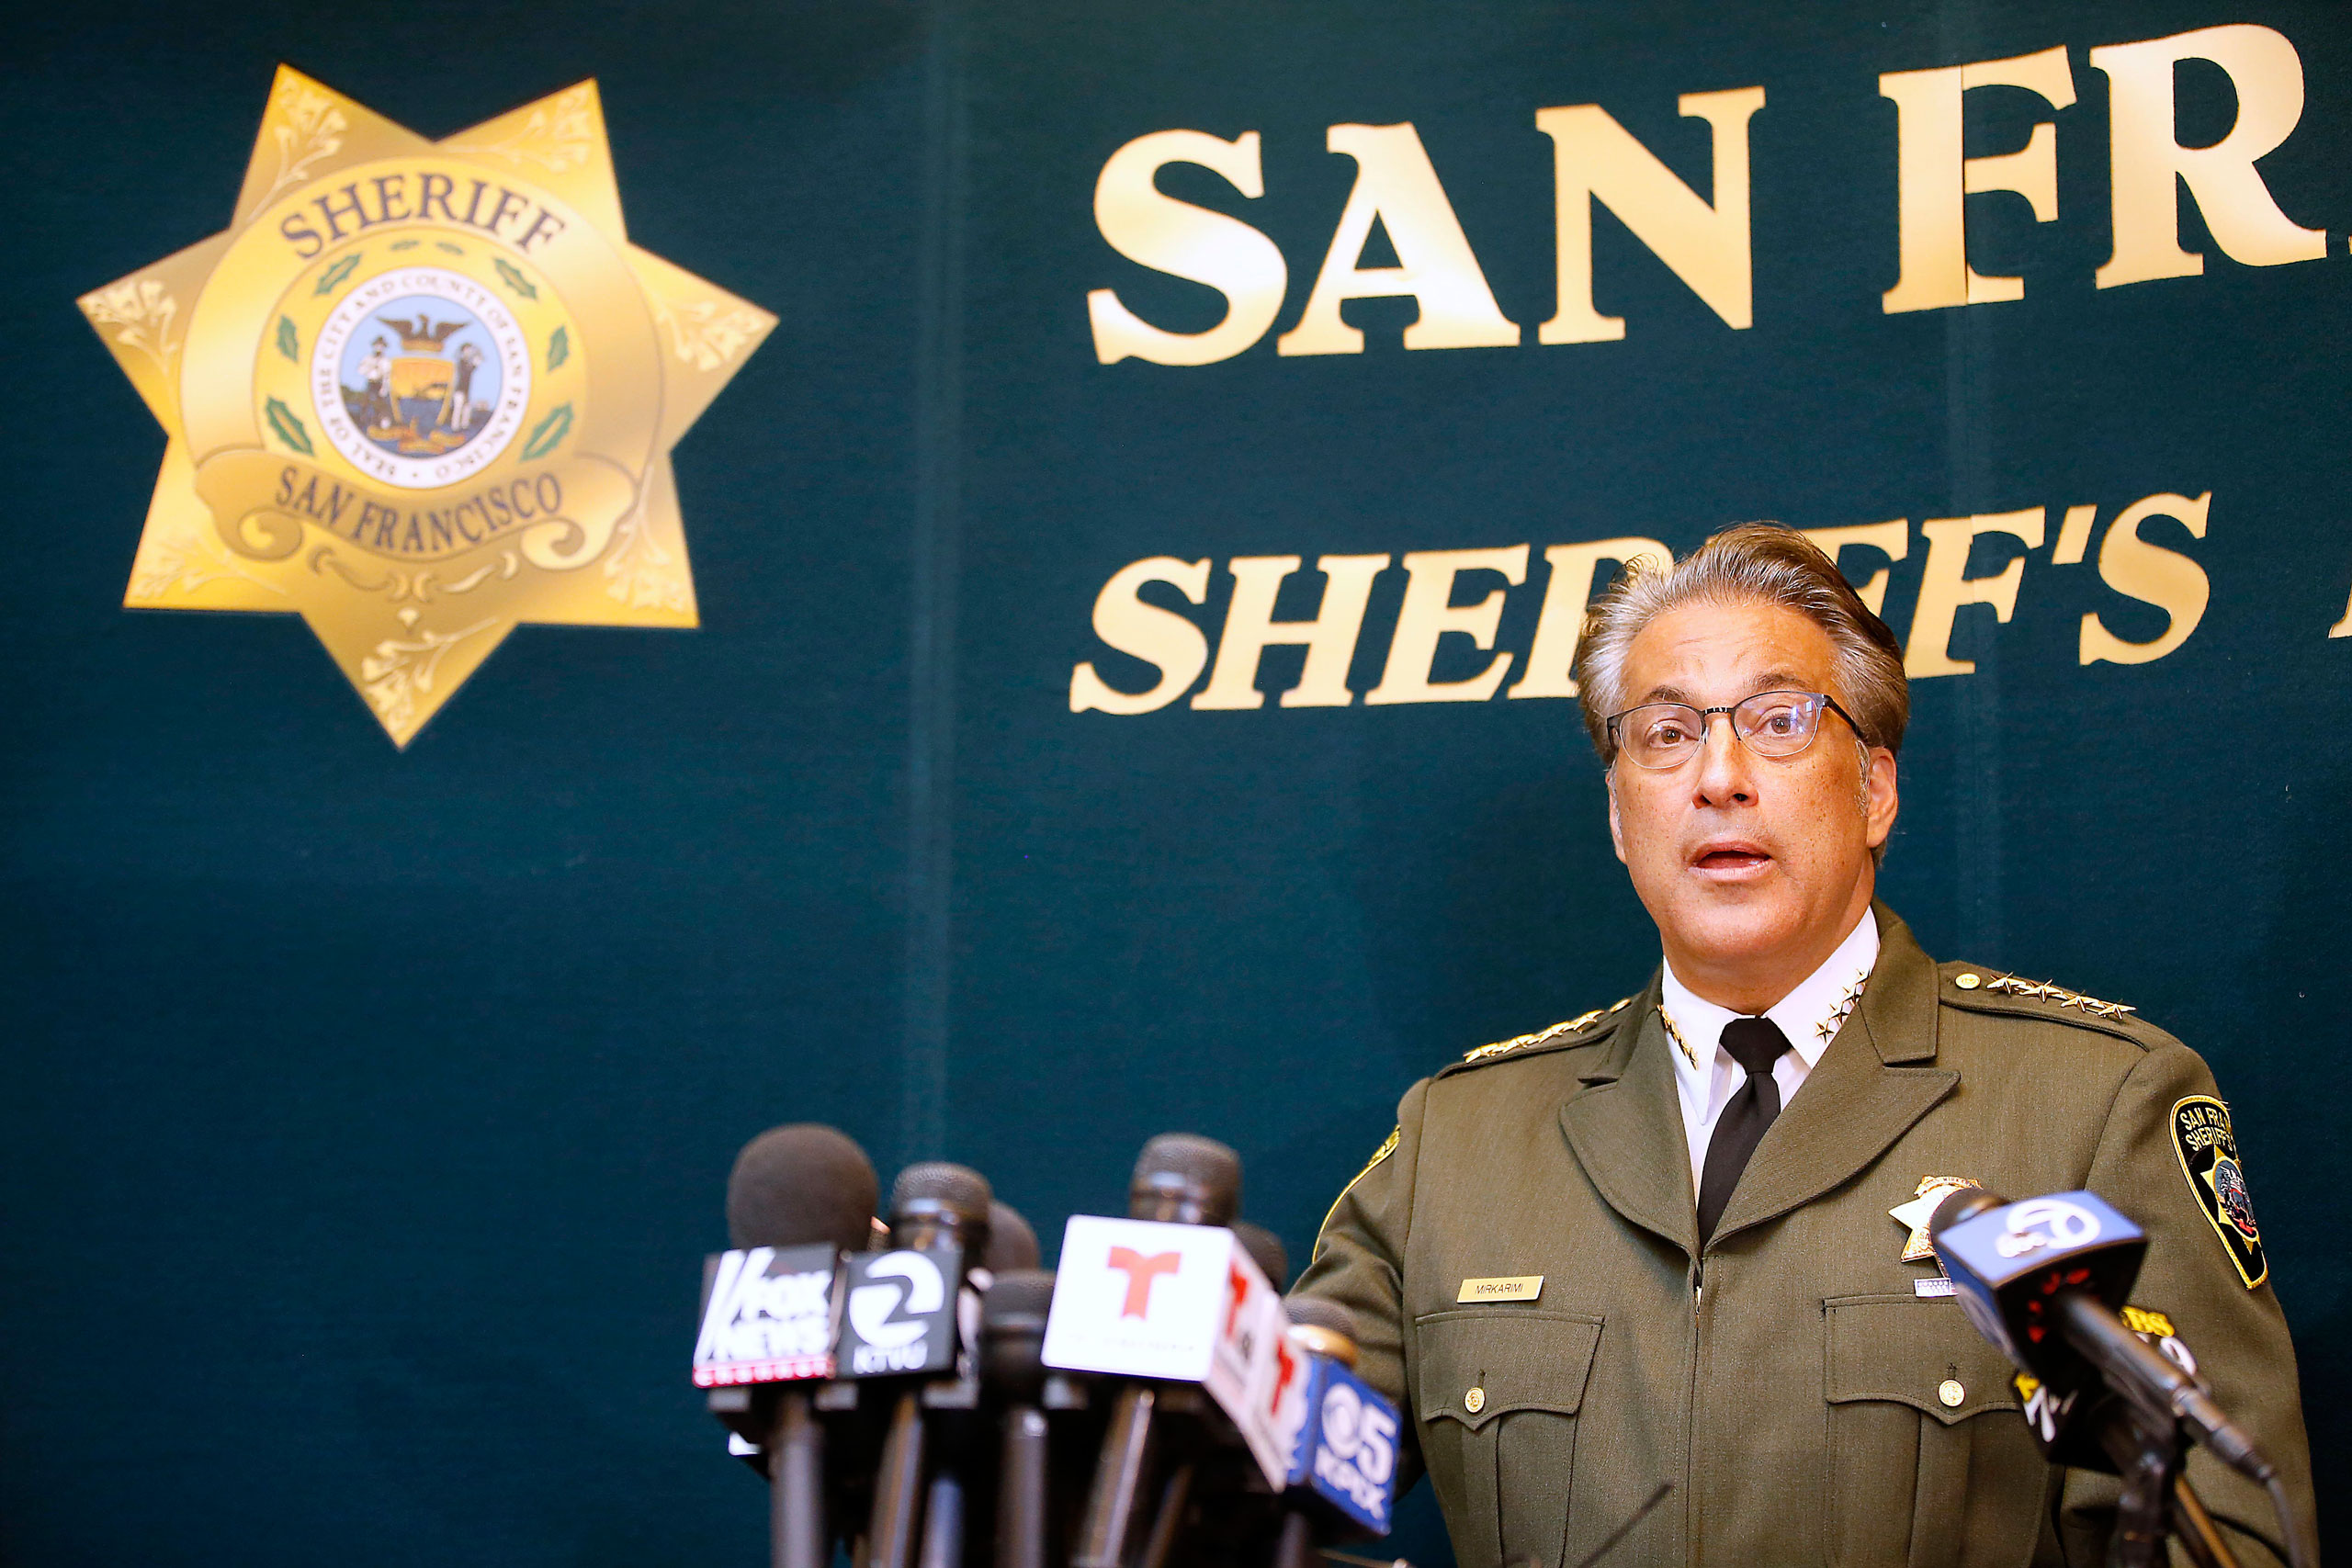 San Francisco Sheriff Ross Mirkarimi fields questions during a news conference in San Francisco on July 10, 2015. (Tony Avelar—AP)